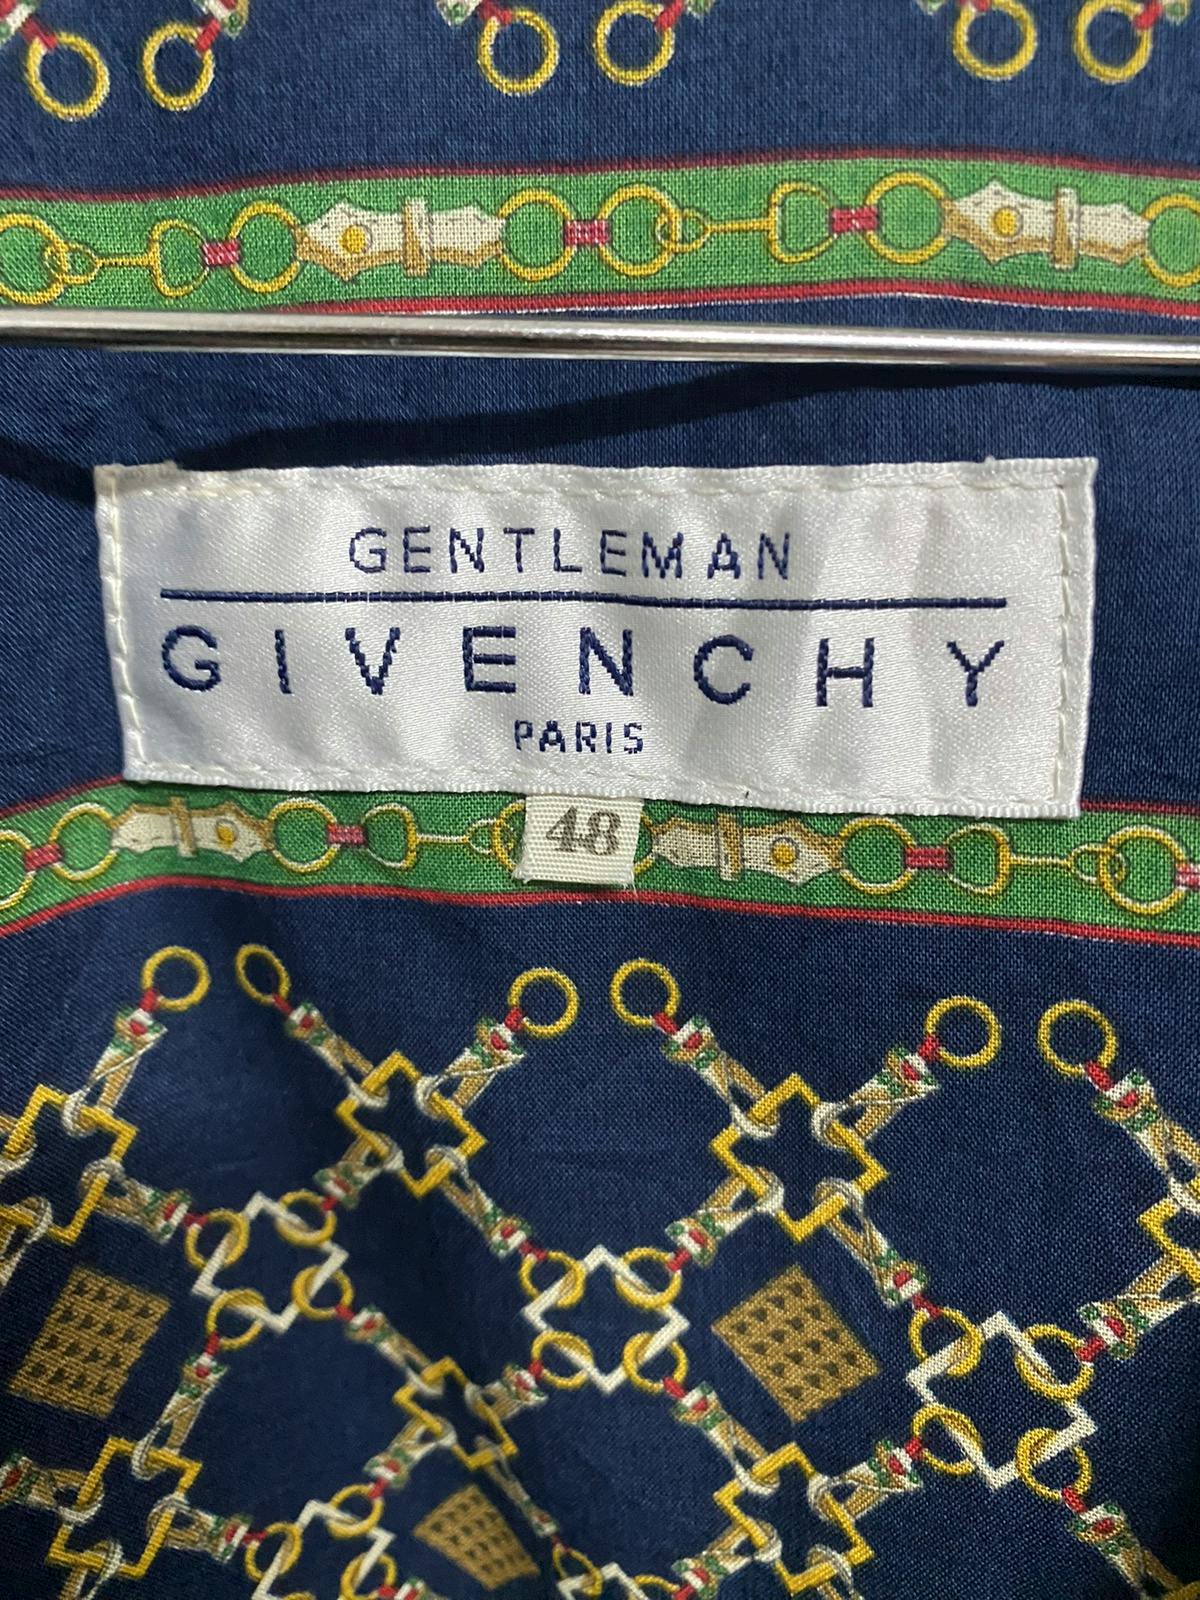 Vintage Givenchy Gentleman Monogram Jacket Made in Italy - 10